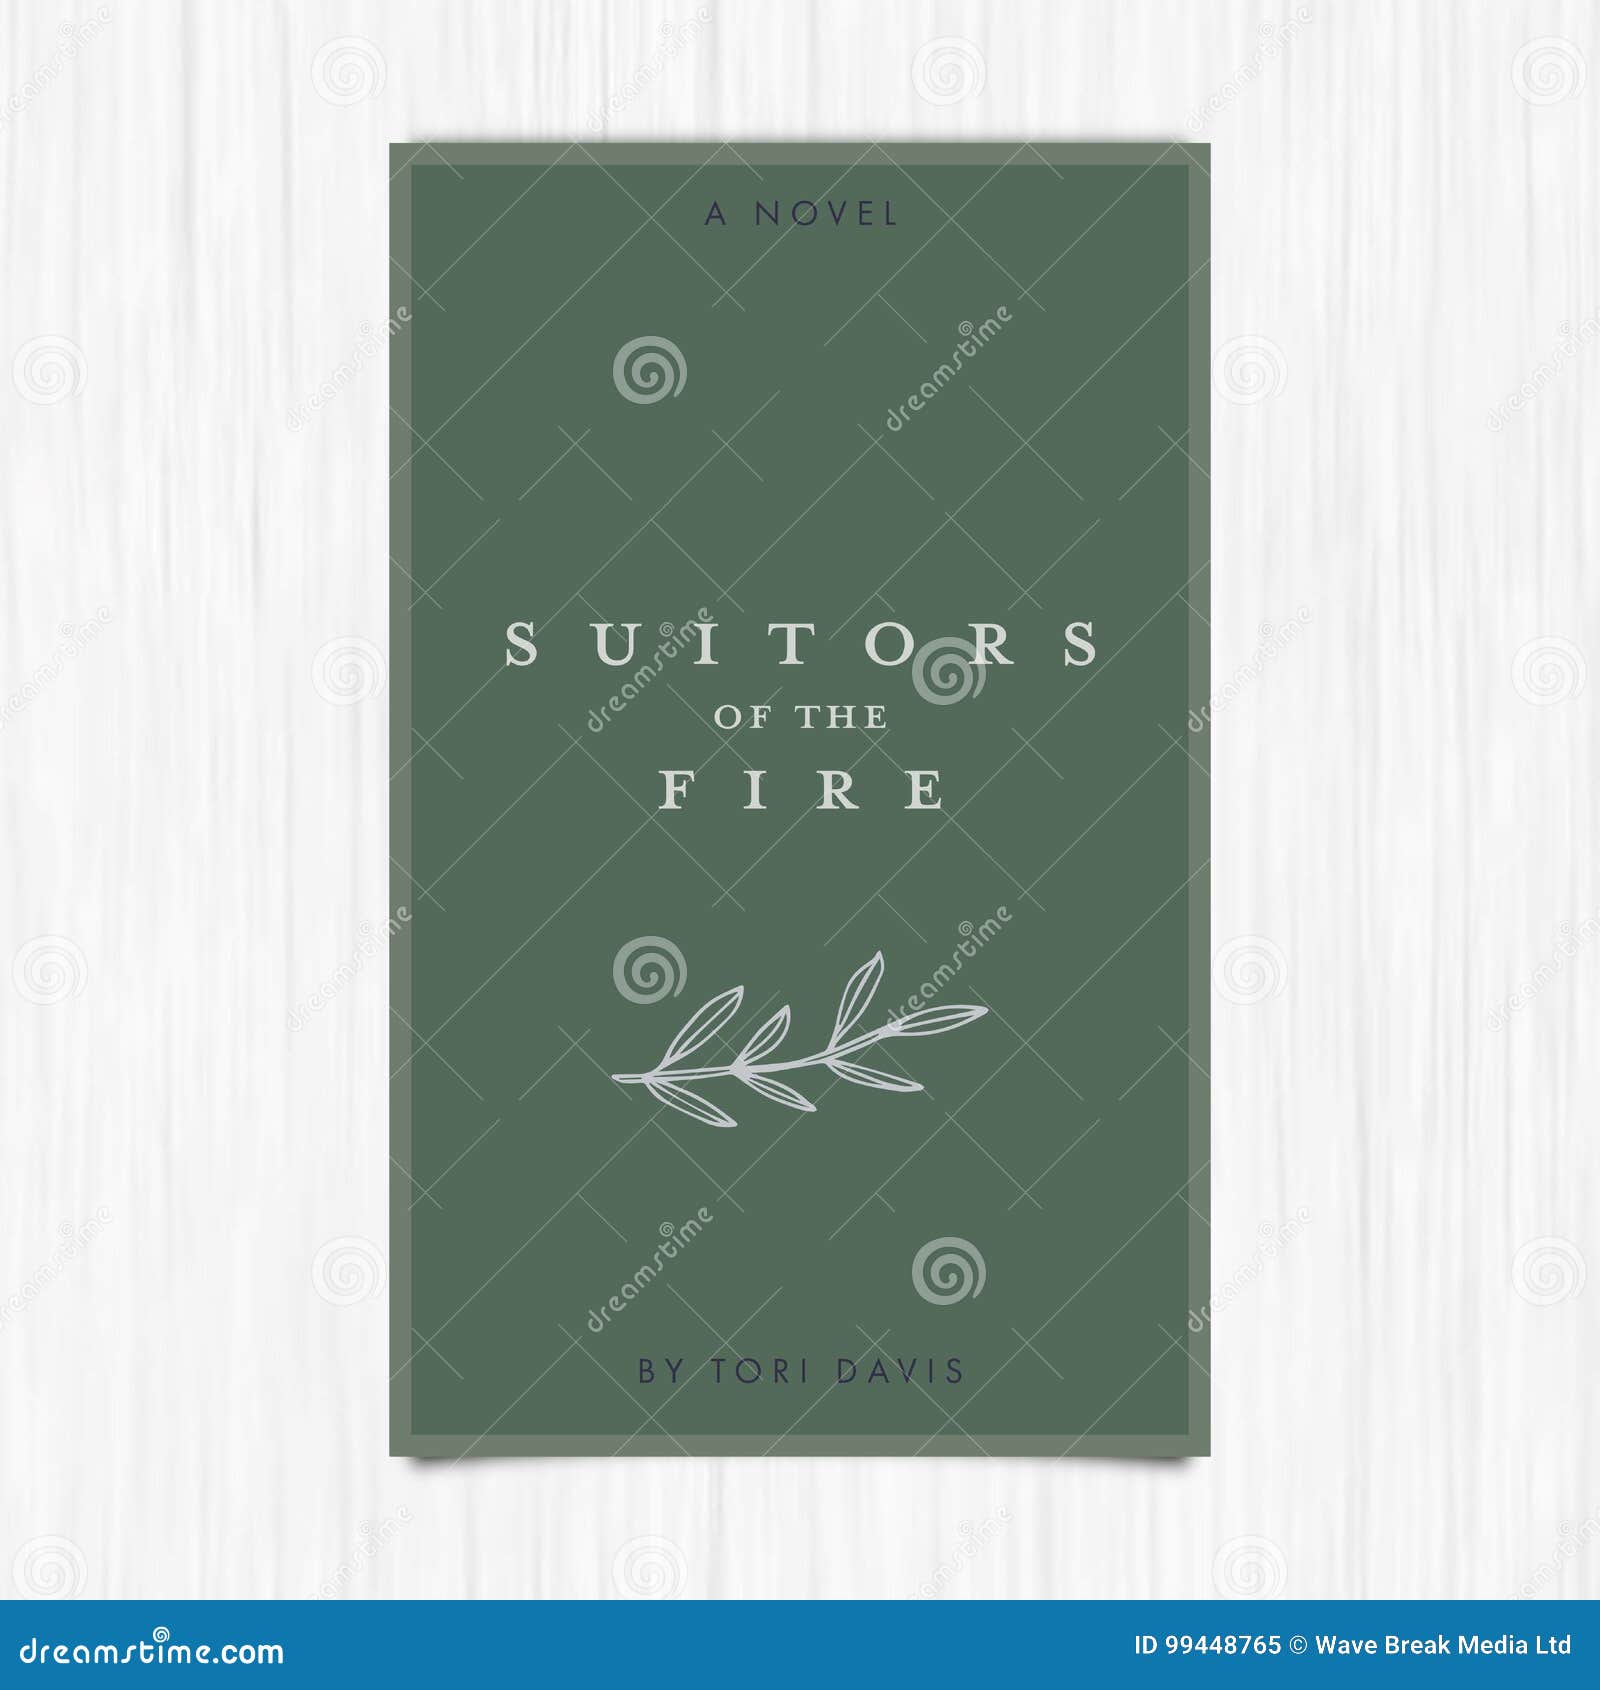 Vector Of Novel Cover With Suitors Of The Fire Text Stock Vector Illustration Of Pictogram Background 99448765